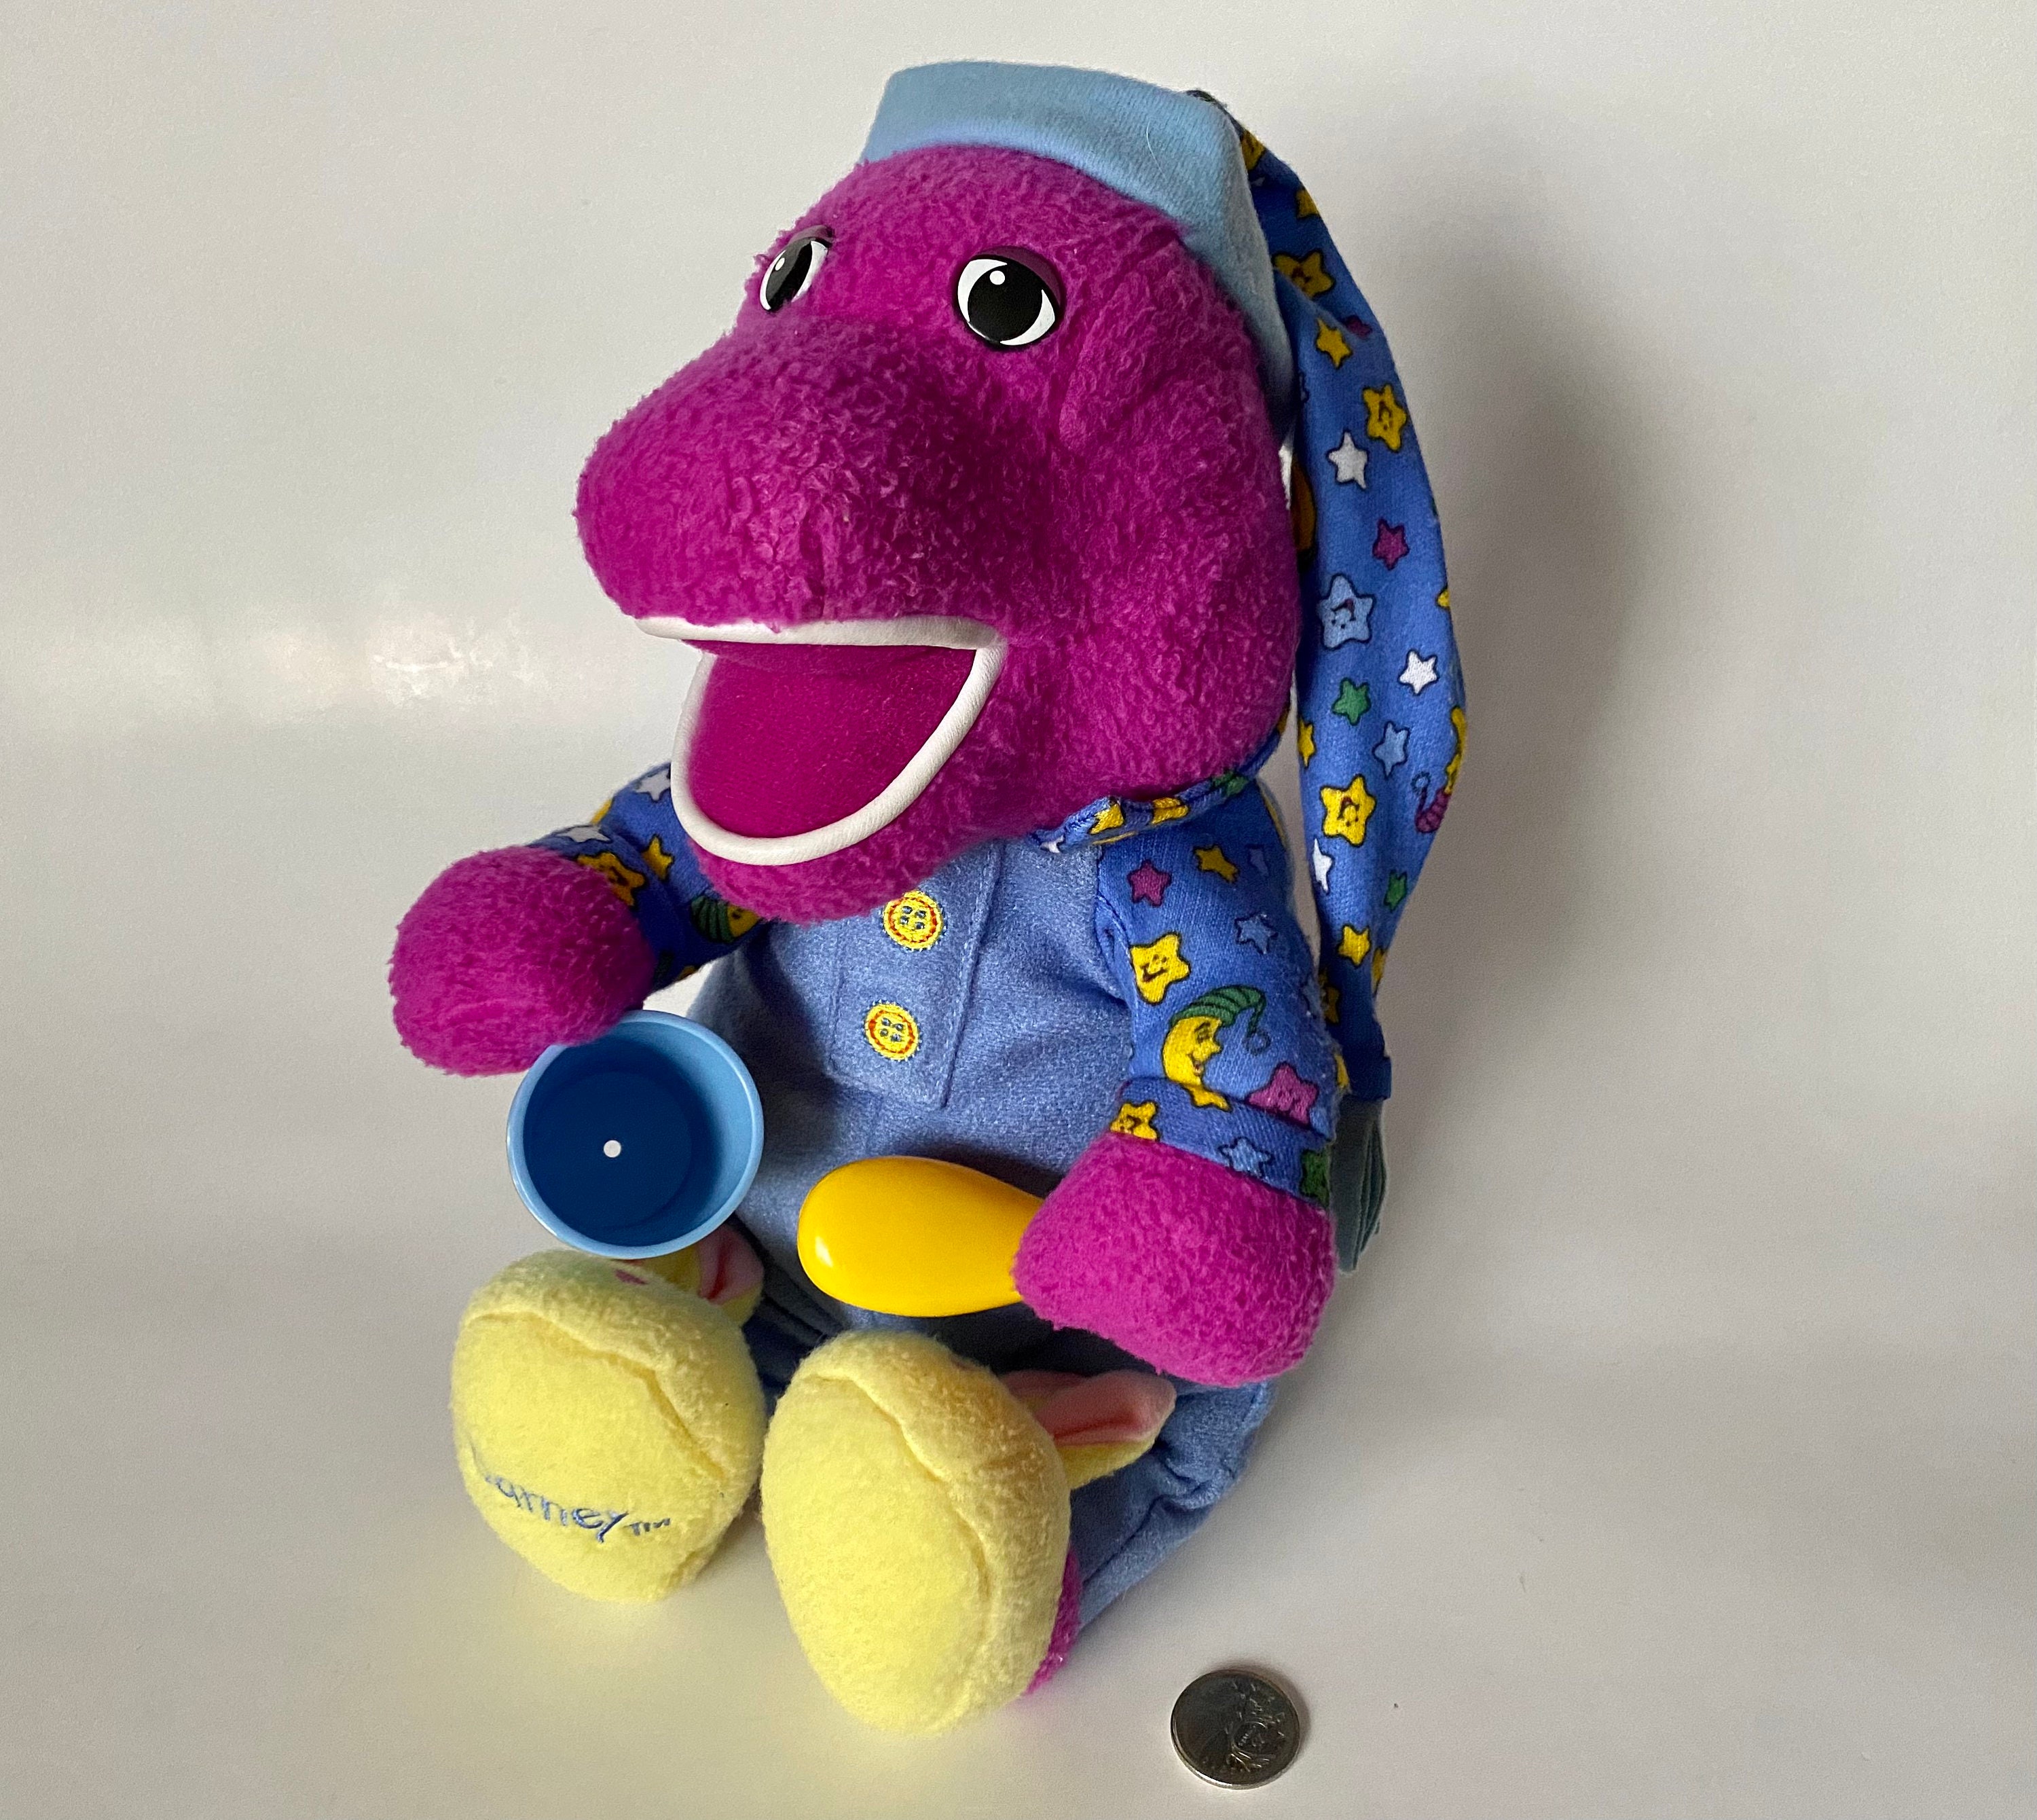 Vintage Stuffed Toy Barney Plush Toy Fisher Price Musical - Etsy